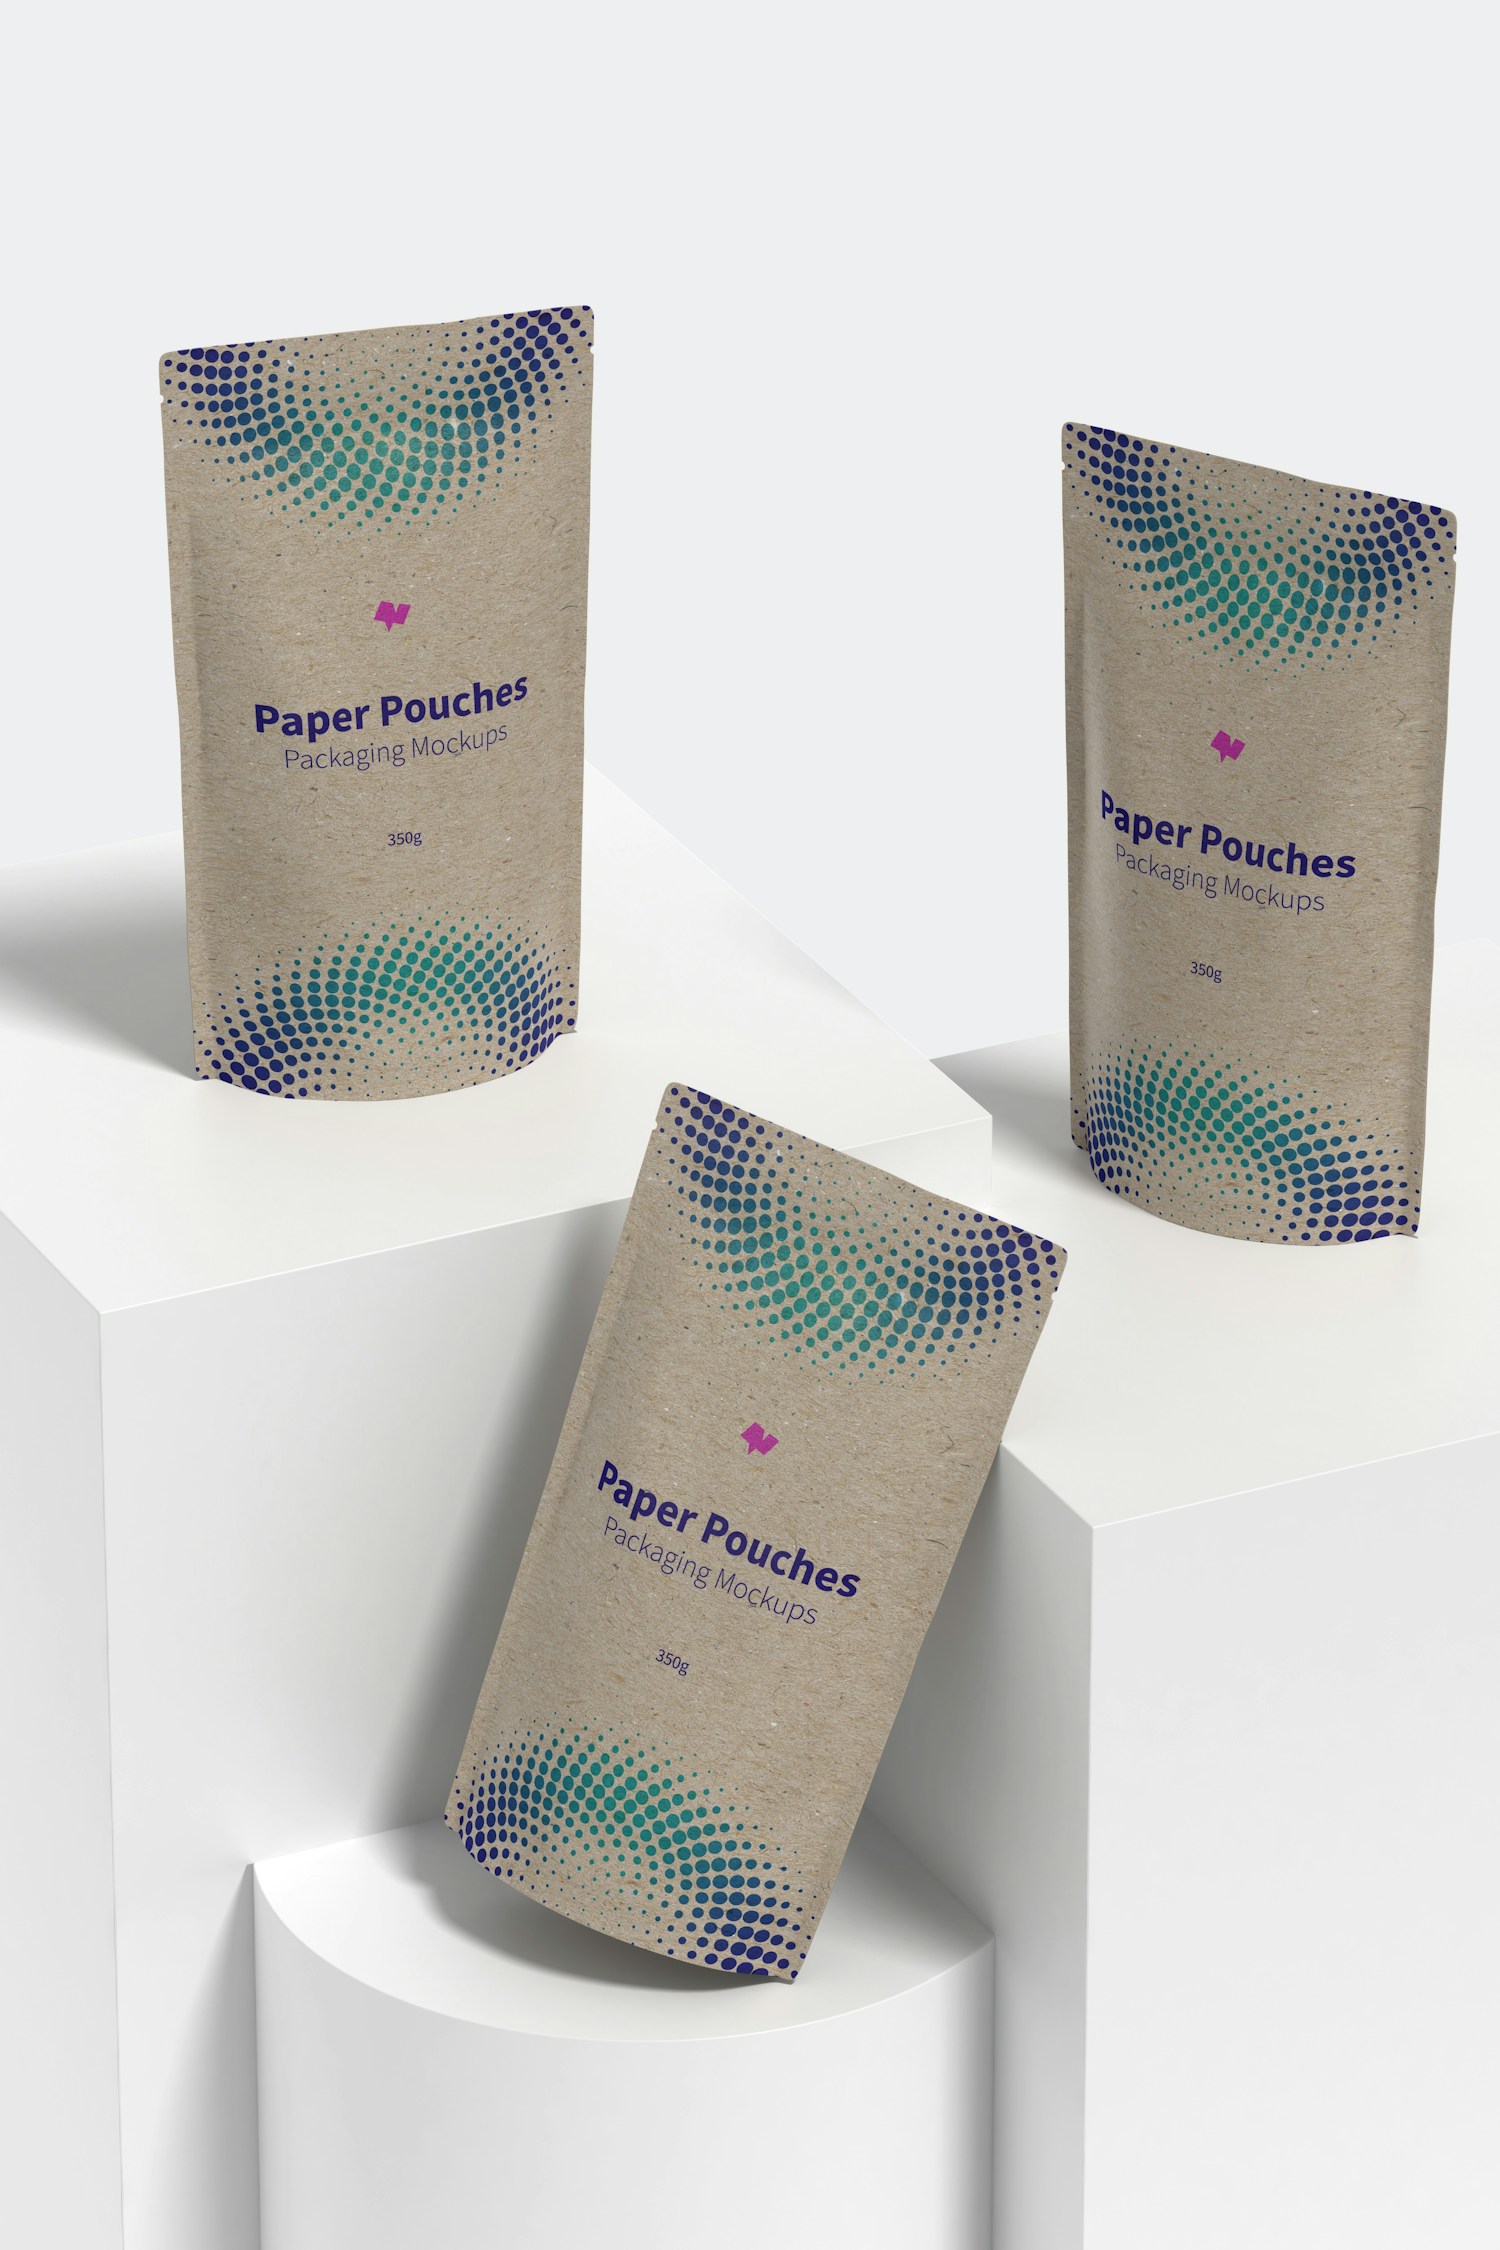 Paper Pouches Packaging Mockup